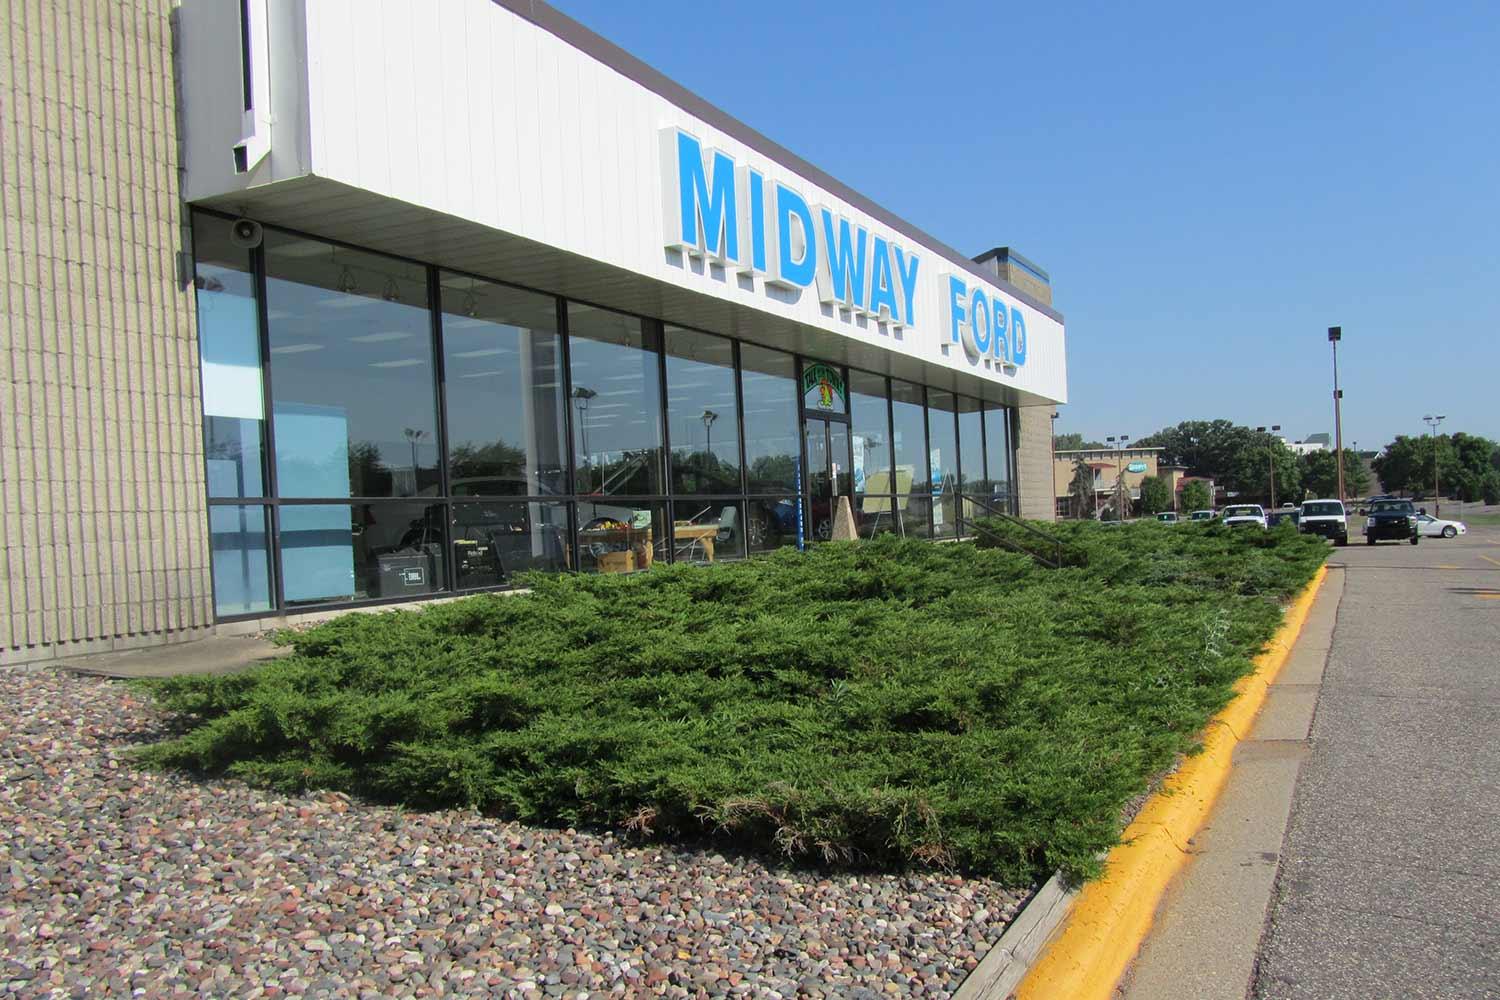 Midway Ford front entry before. Low evergreen shrubs are uninviting.